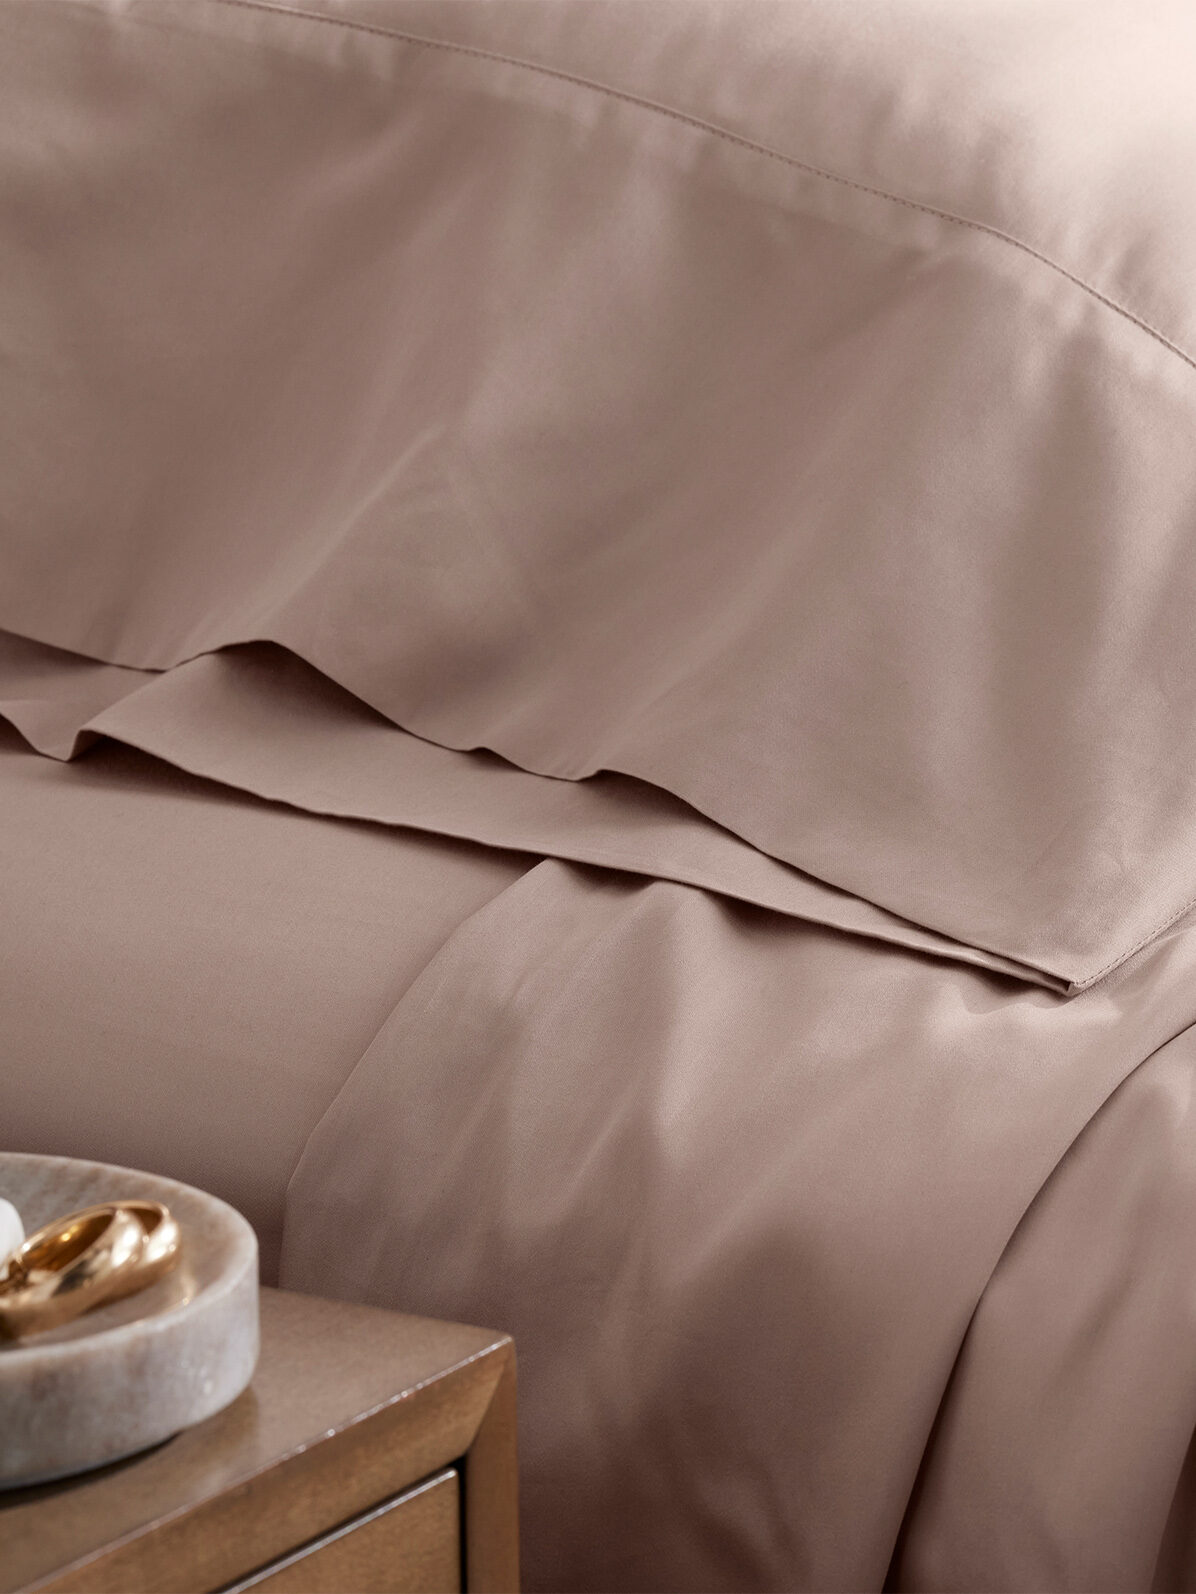 Luxurious beige cotton bedding with soft wrinkles on a cozy bed next to a wooden bedside table featuring a decorative item.